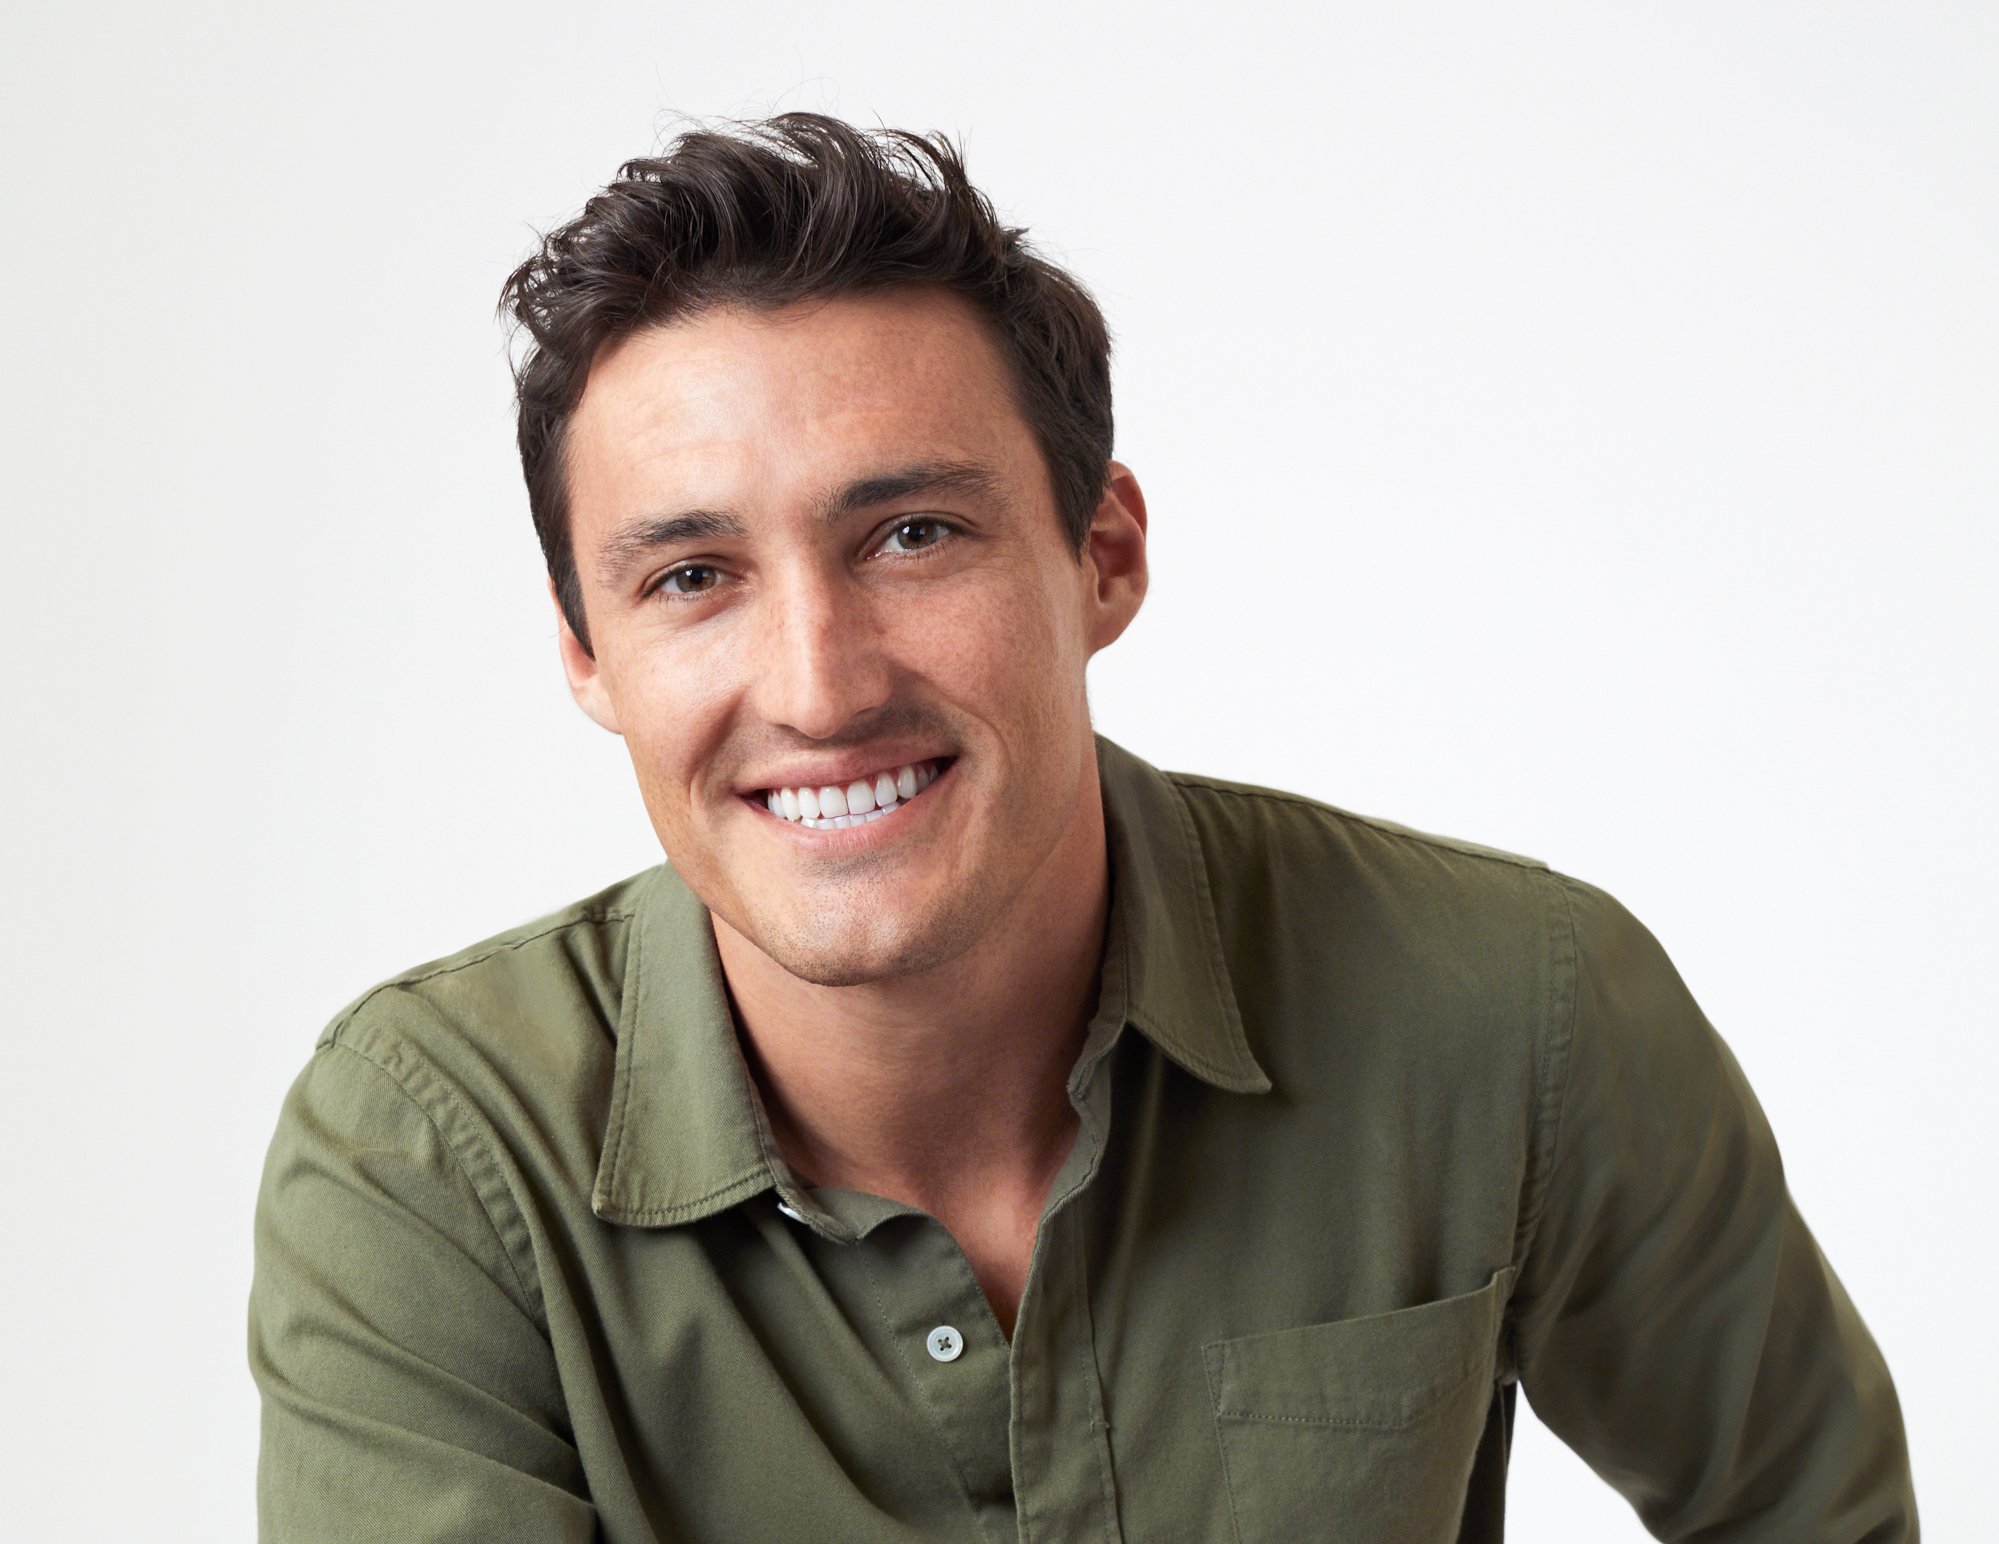 Tino Franco, seen here in an army green colored button down, got Rachel's First Impression Rose.